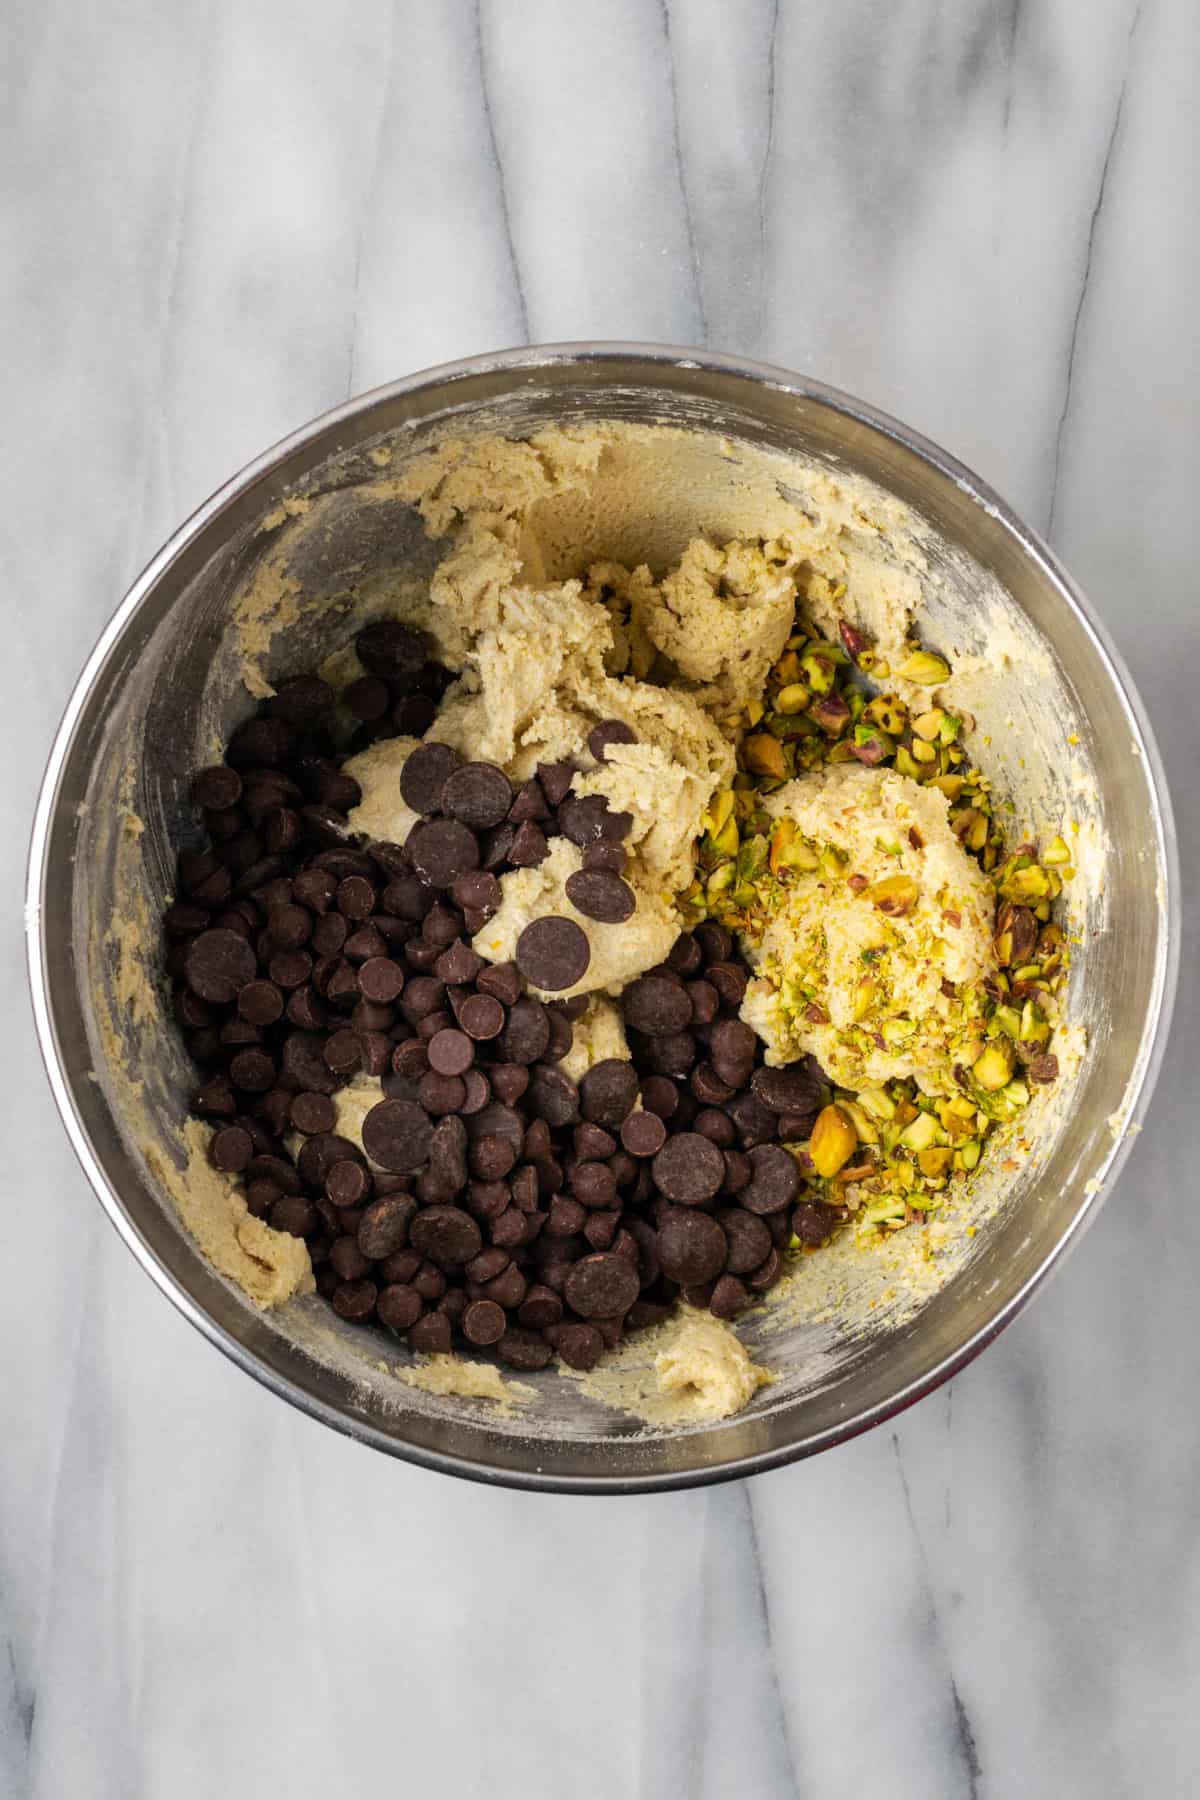 Chocolate chips and pistachios added to the mixed cookie dough.